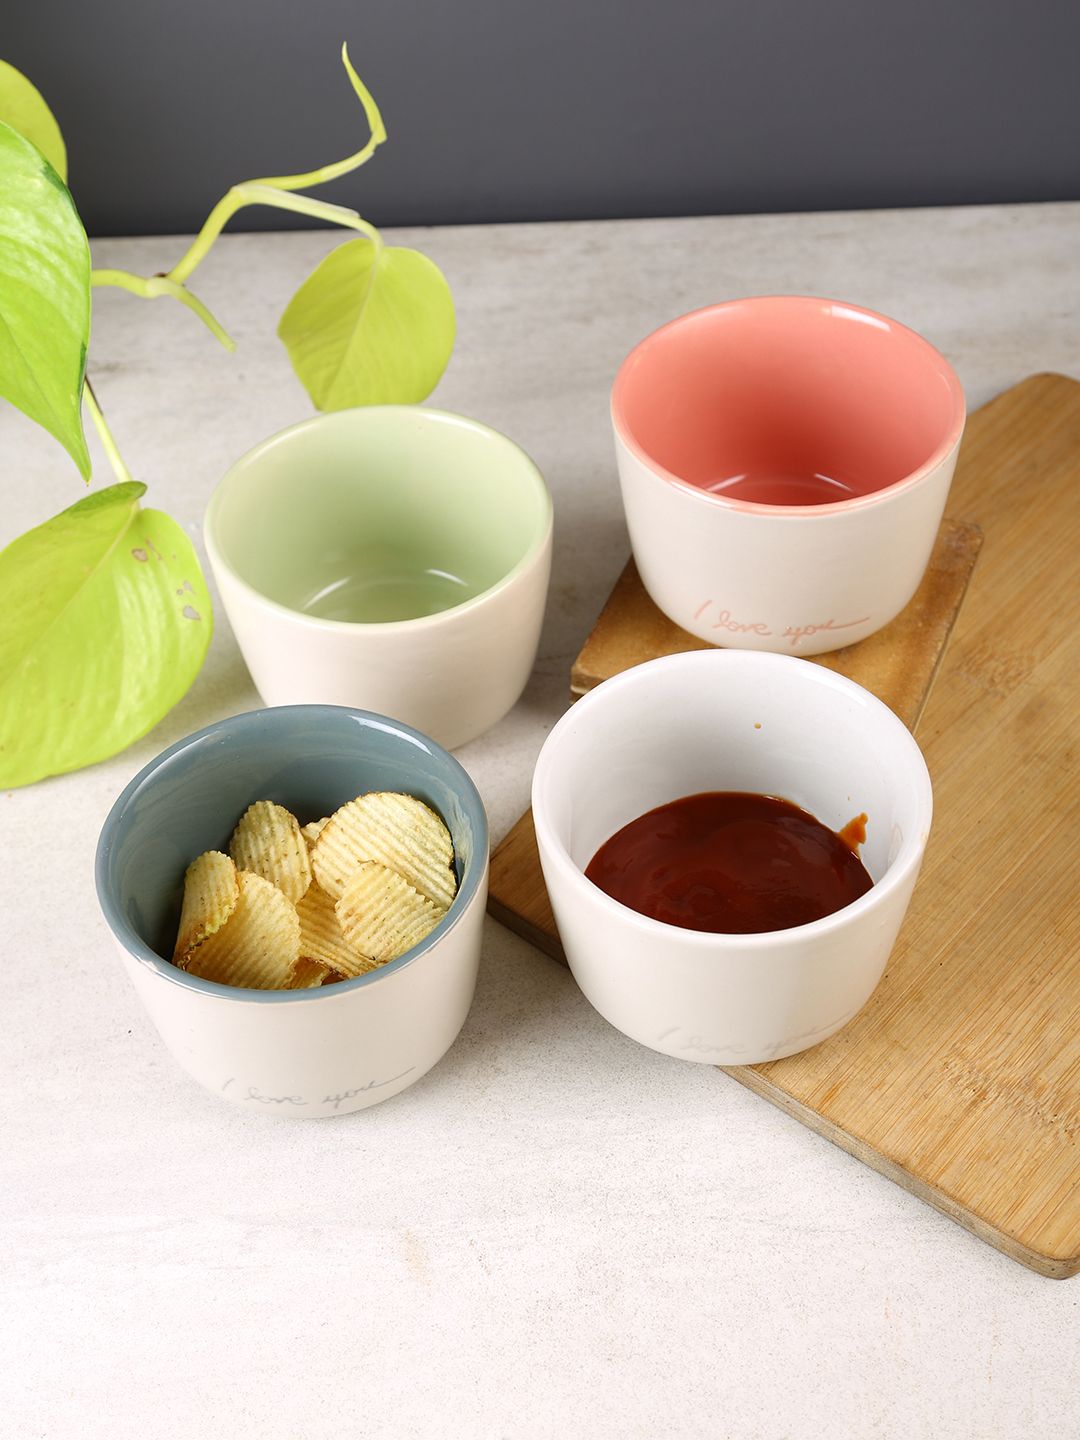 Aapno Rajasthan White & 4 Pieces Ceramic Glossy Bowls Price in India